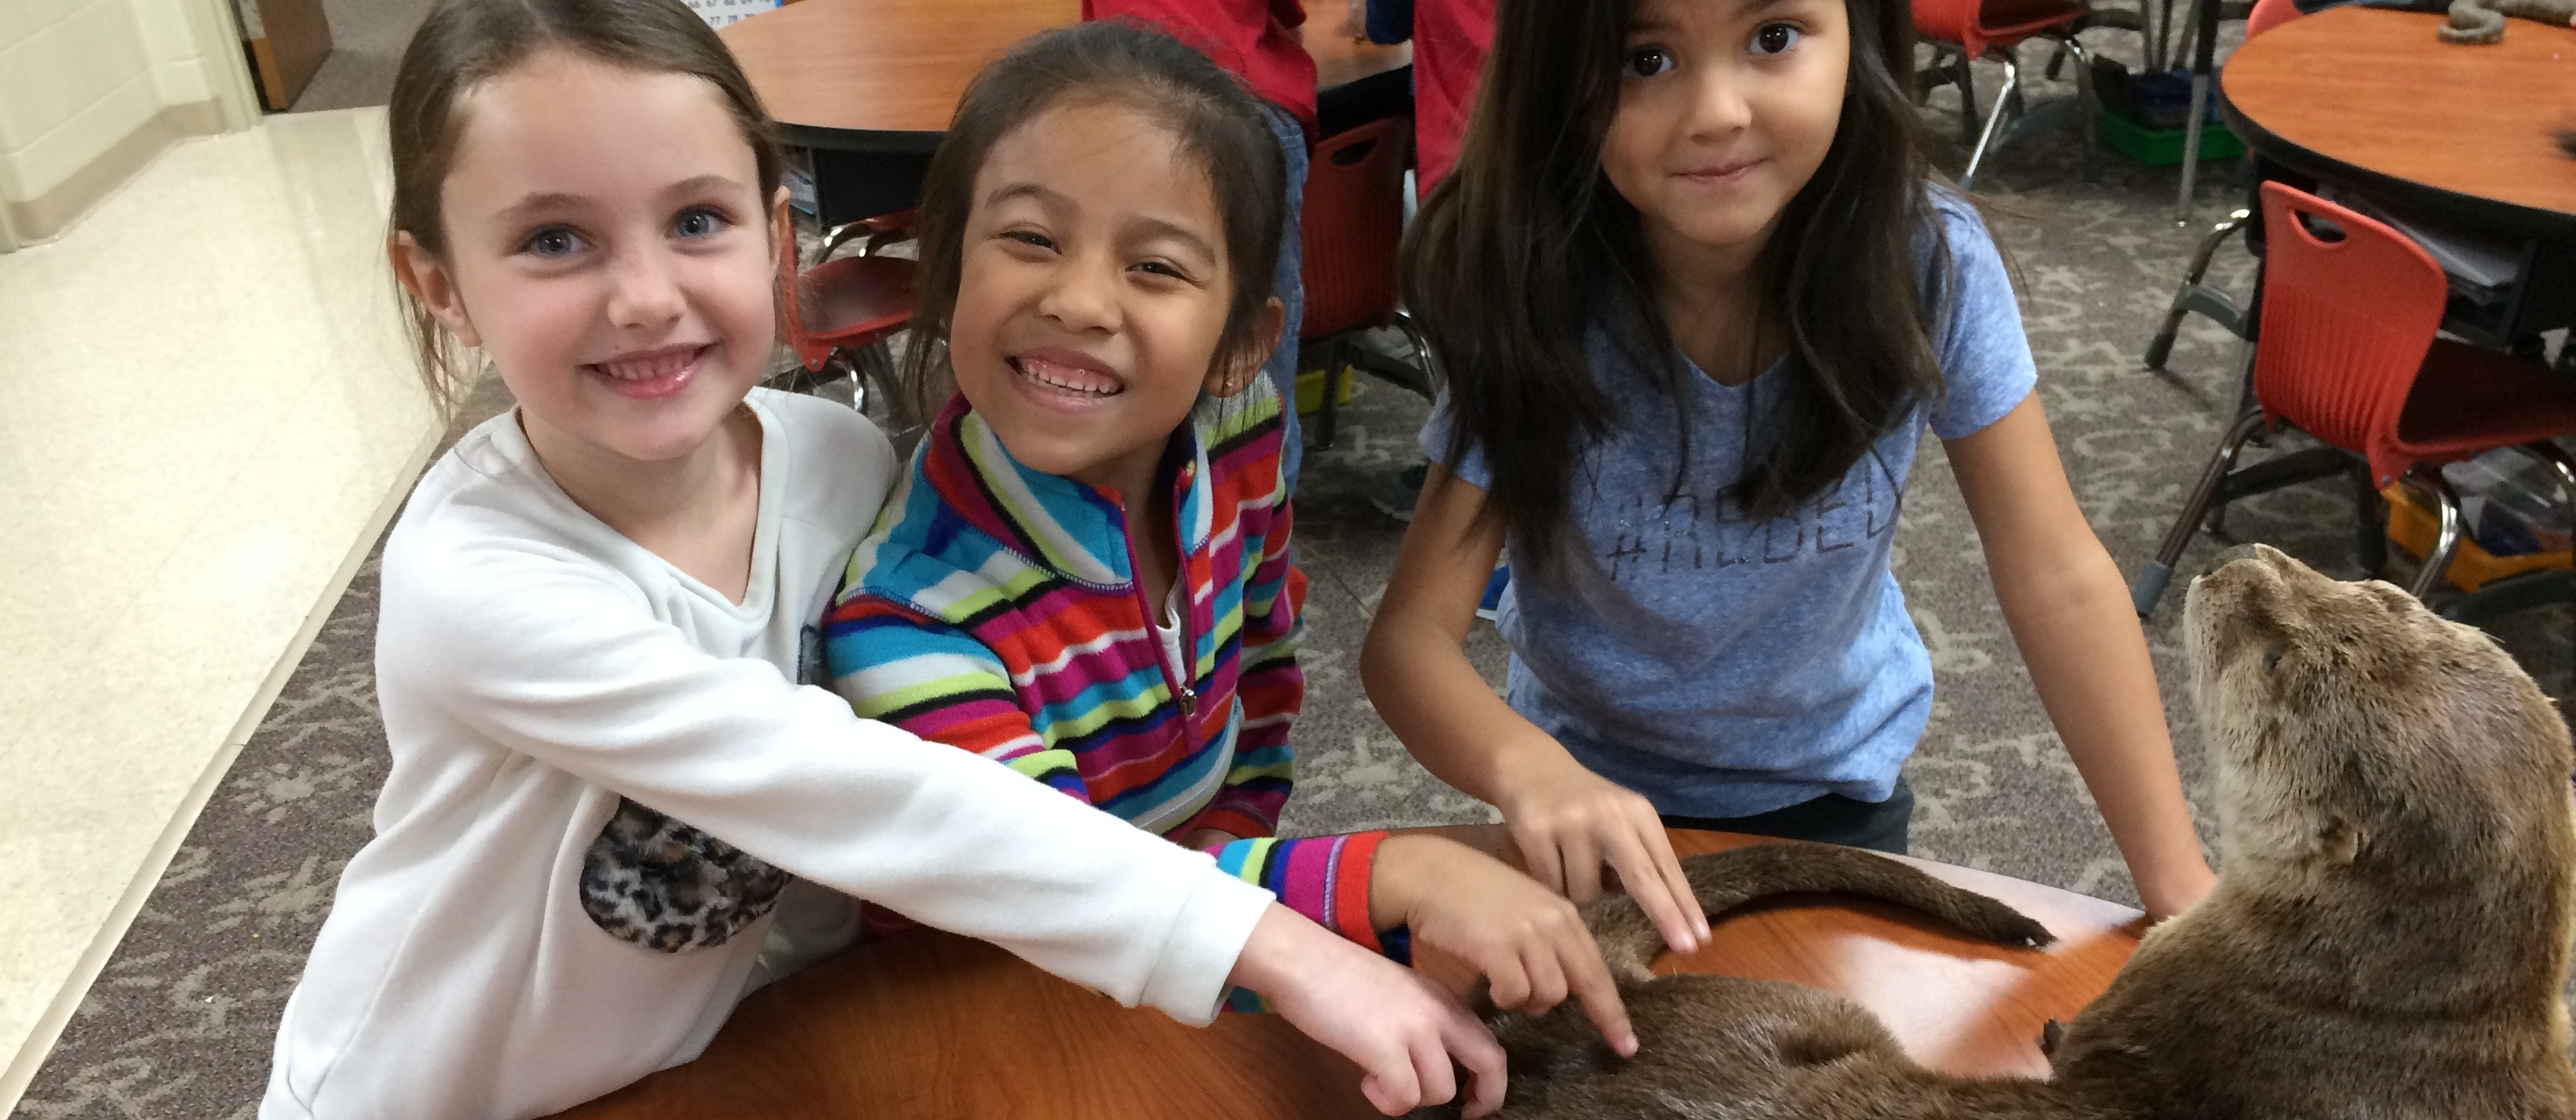 Three student smile while petting stuffed otter